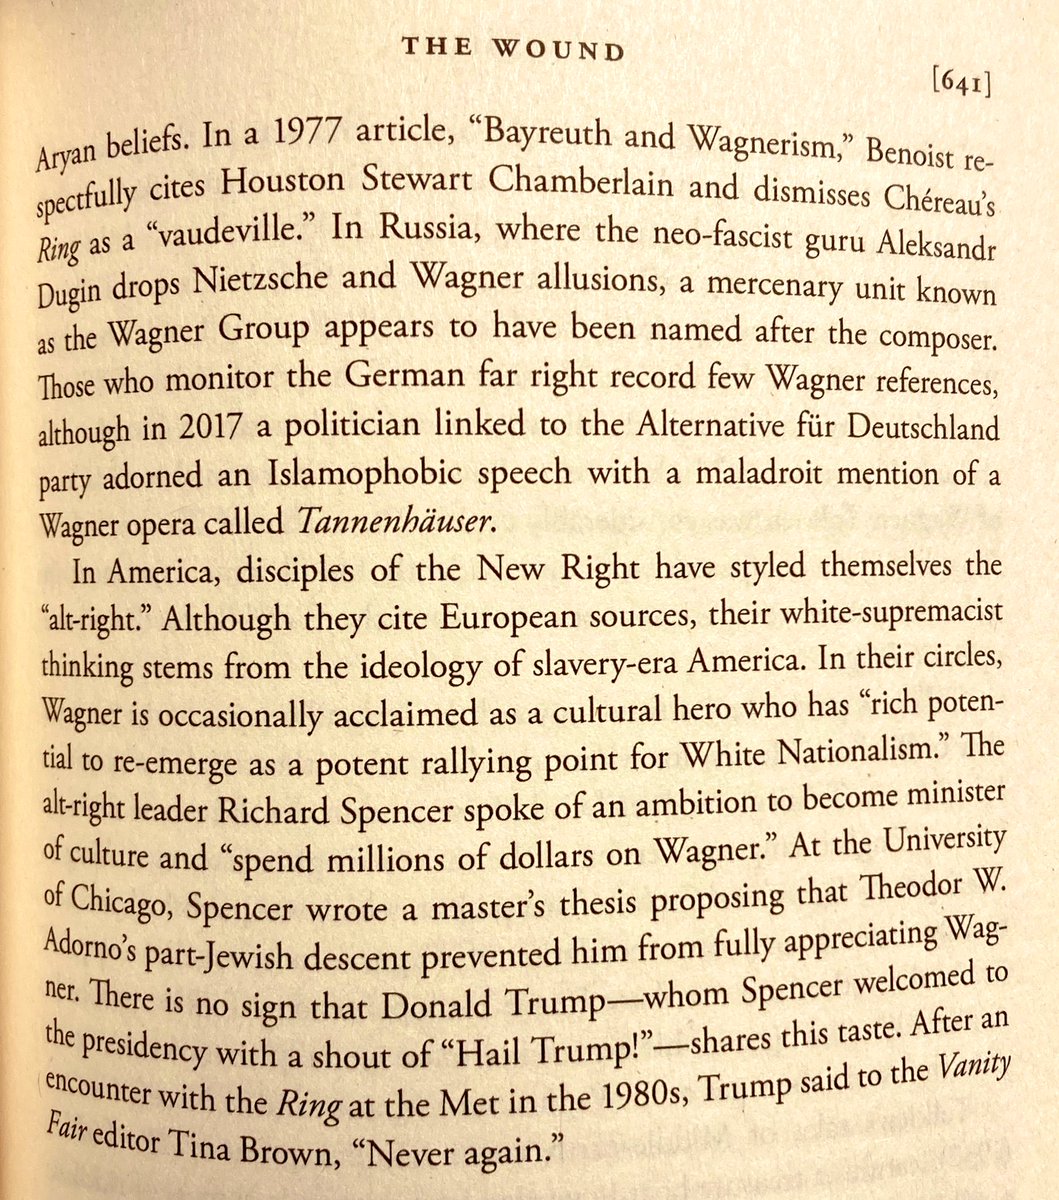 Alex Ross is a musically illiterate fool and his book “Wagnerism” is pretentious, trivial garbage, but it did have this funny Trump-Wagner connection in it. 
“Never again.”